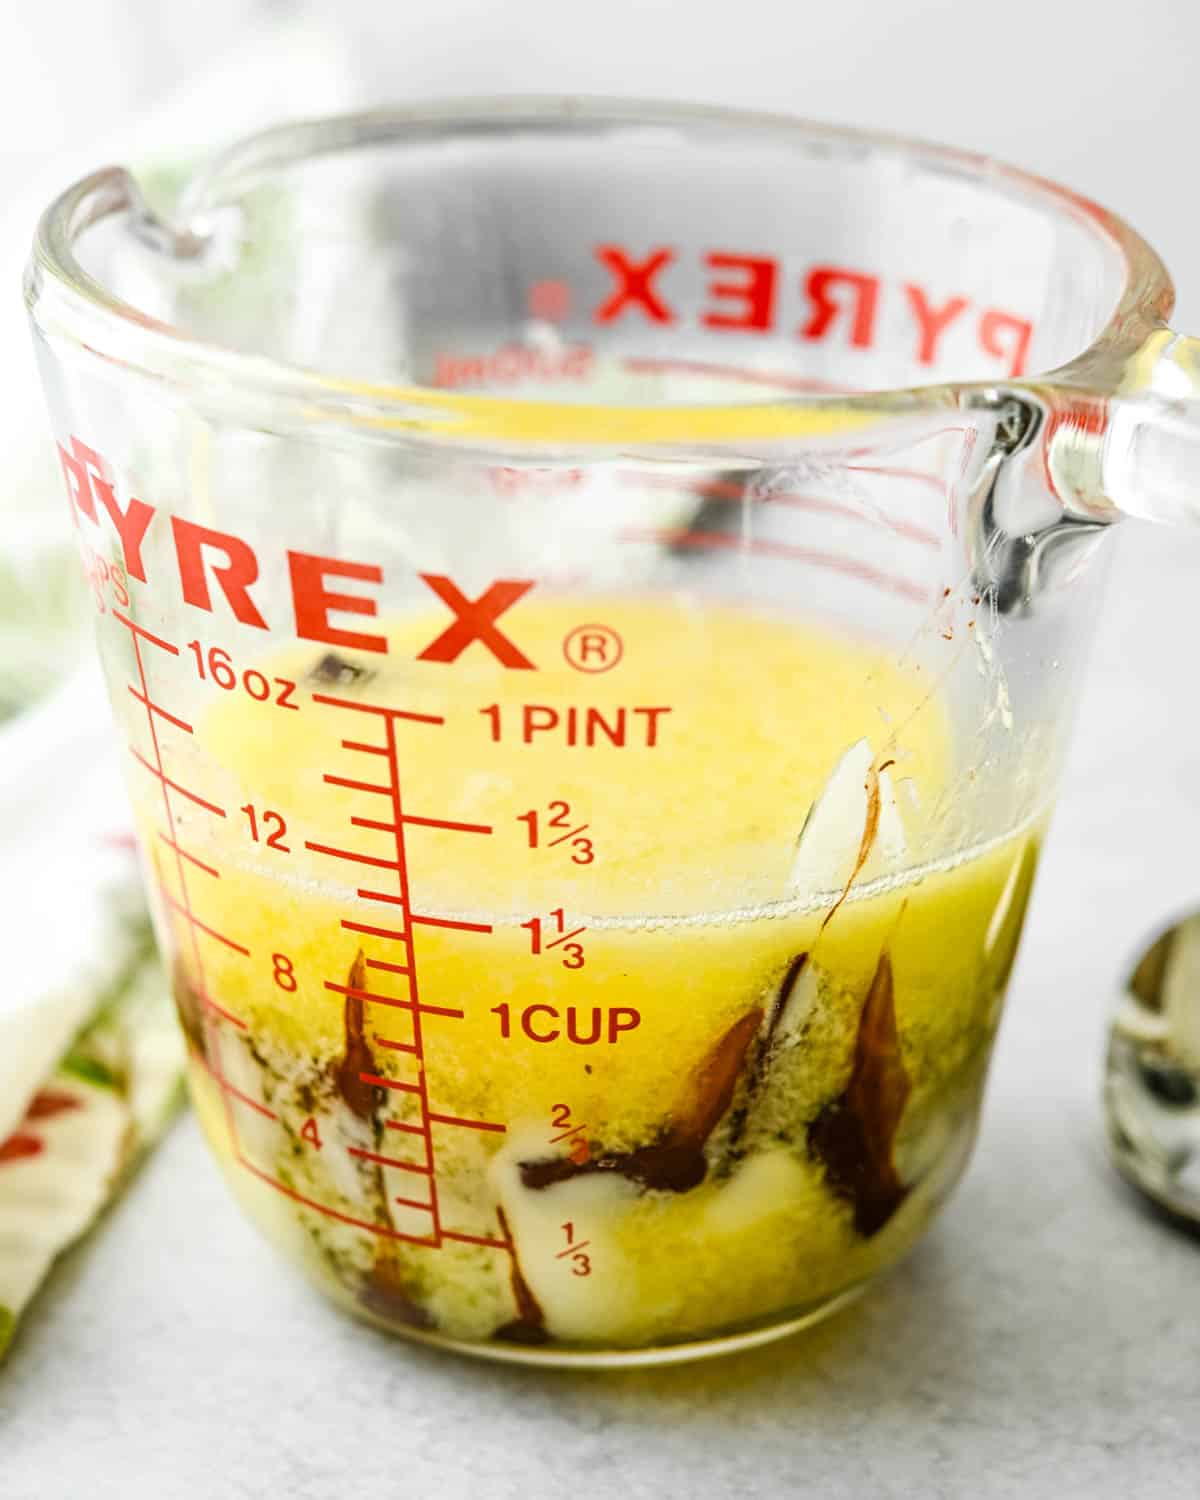 melting chocolate and butter in a glass measuring cup.